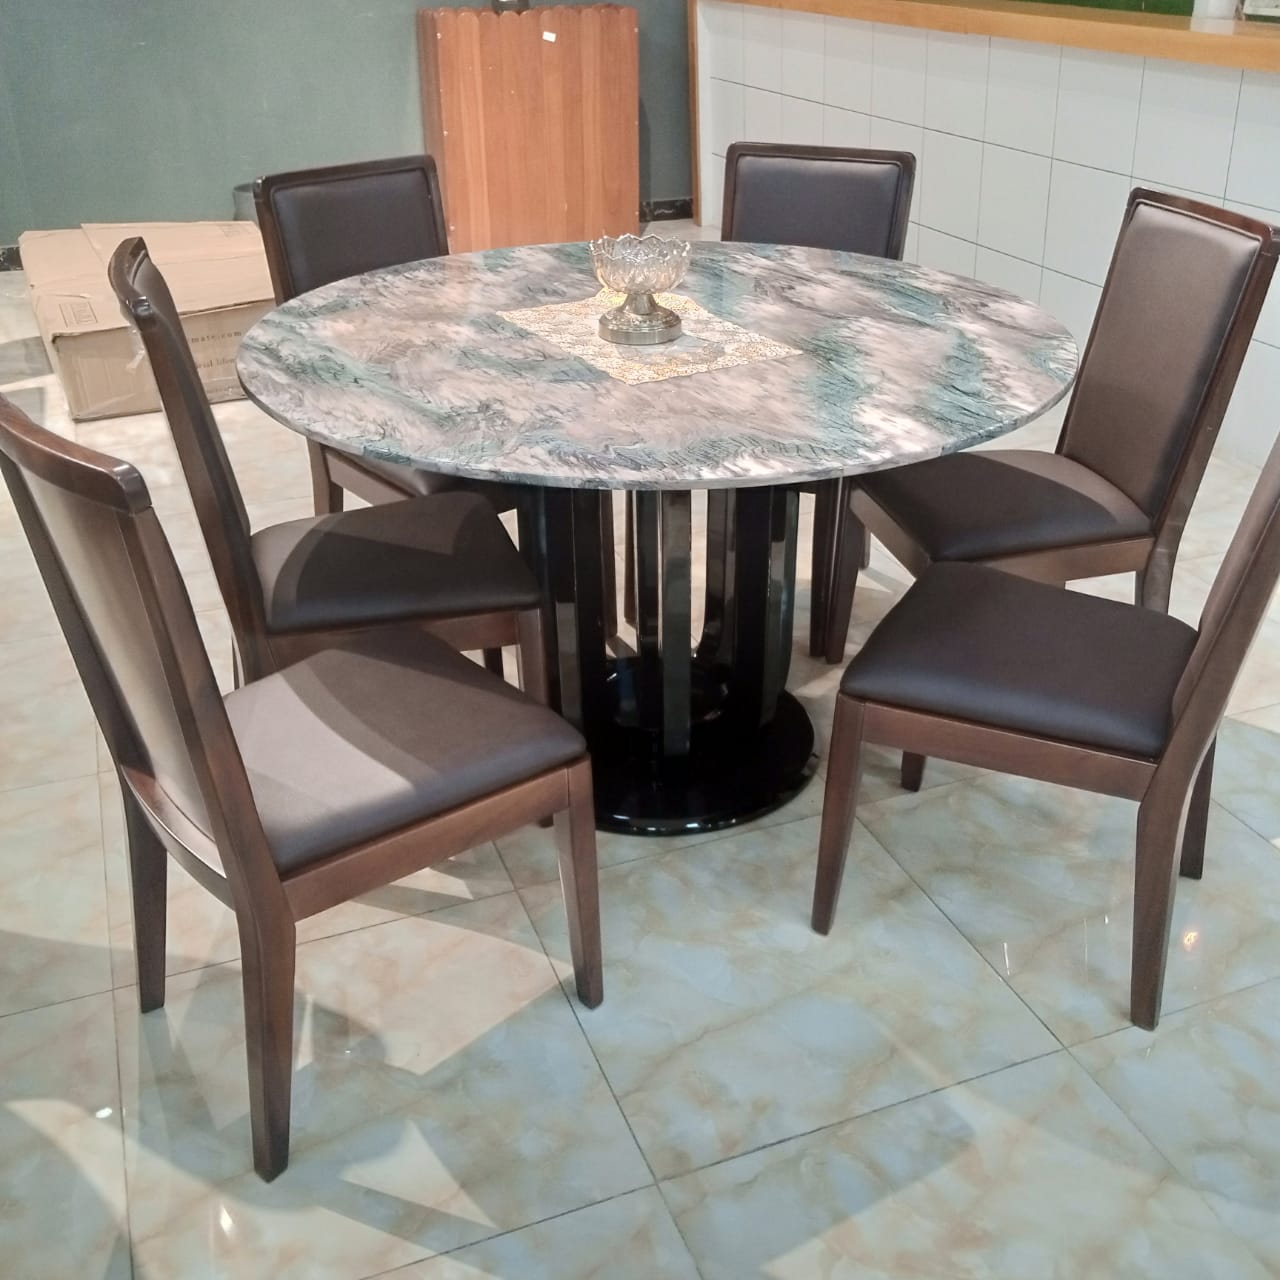 6 Seater Marble Top Dining Set HOG-Home, Office, Garden online marketplace